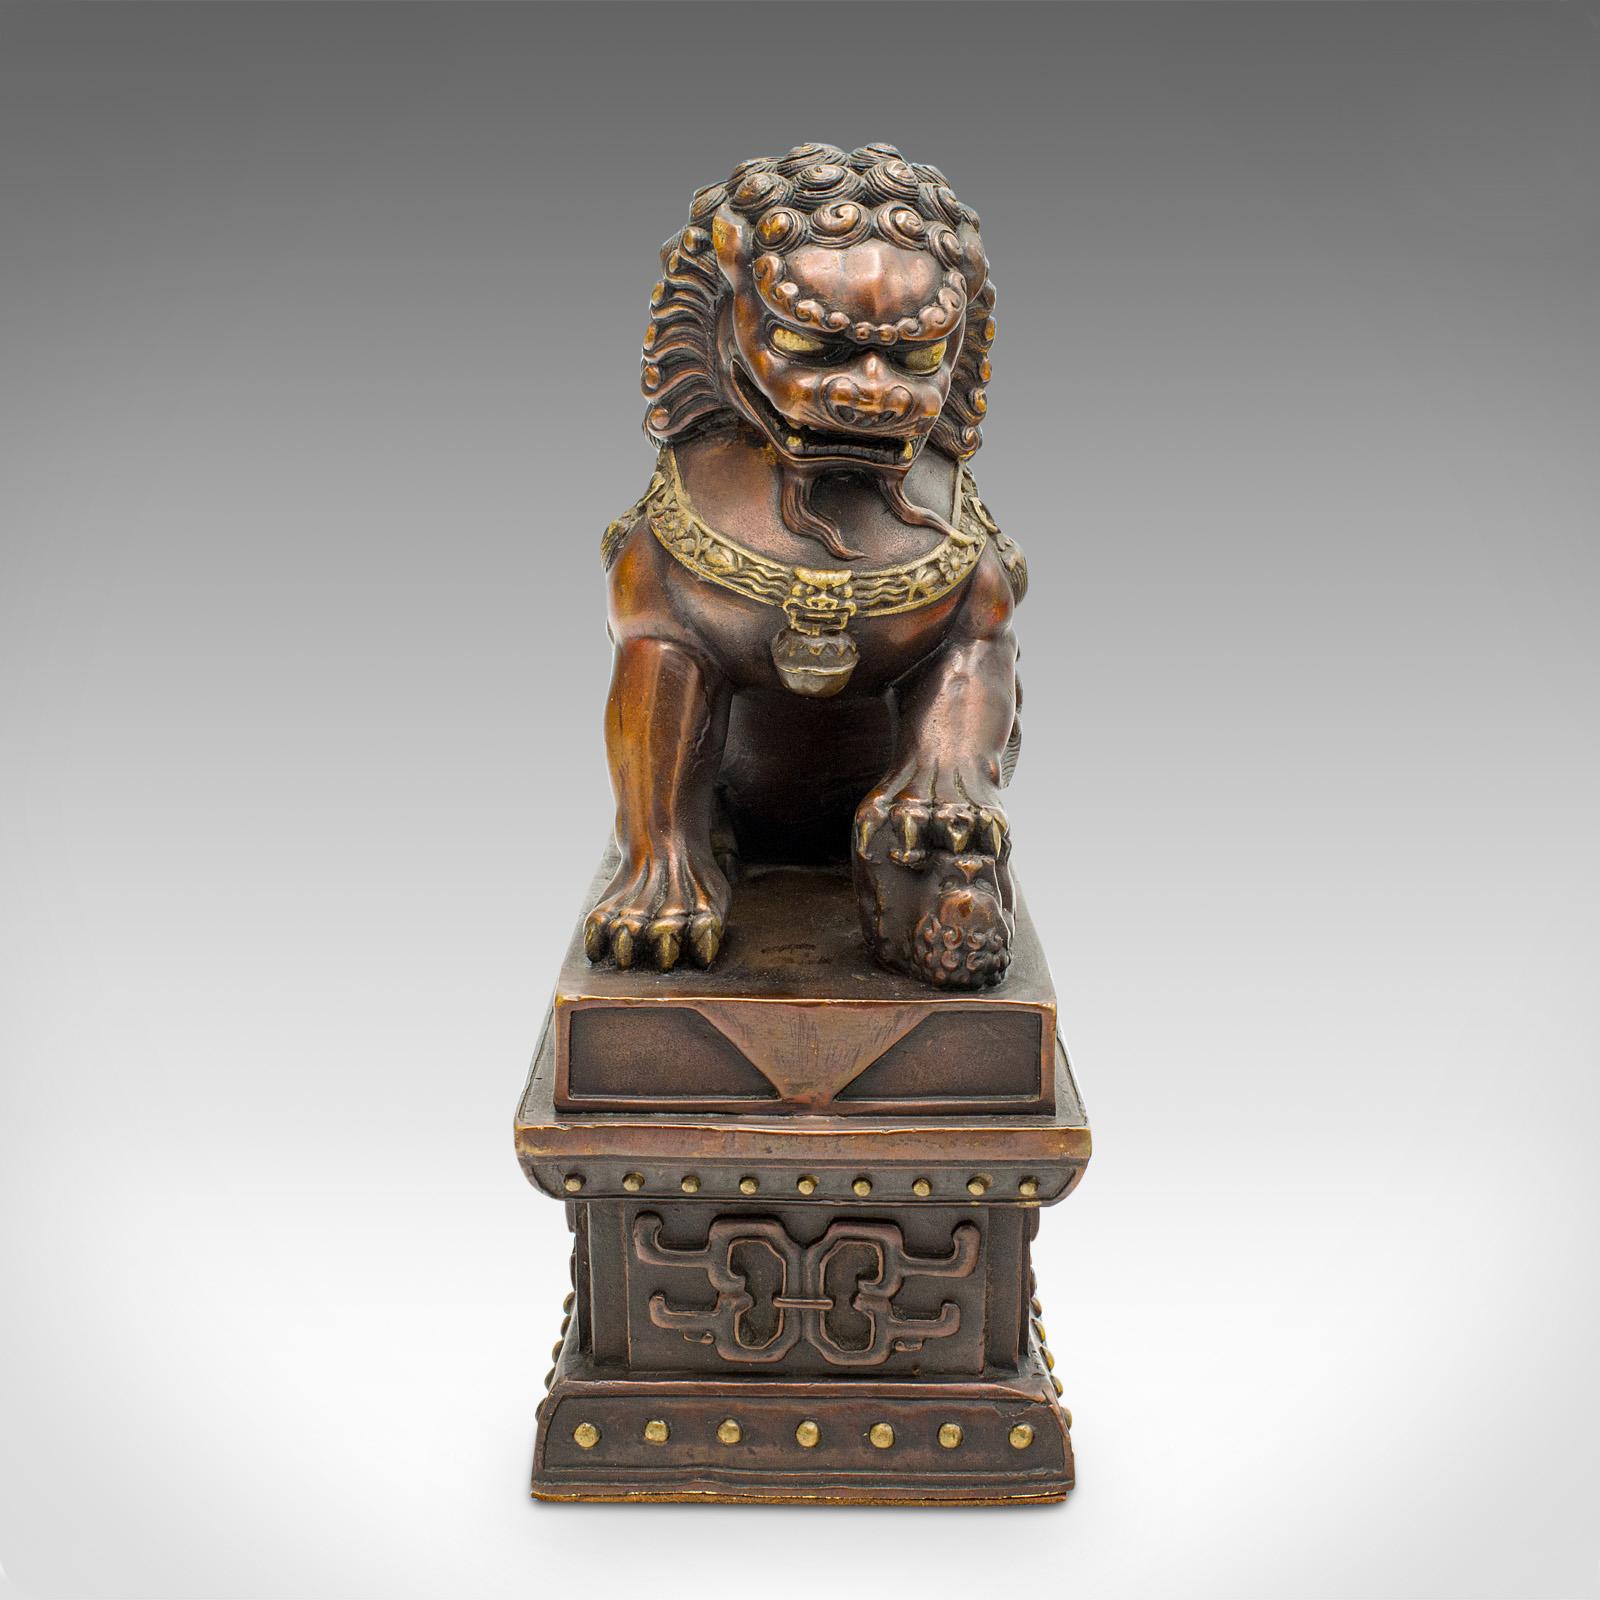 20th Century Pair Of Vintage Imperial Lion Statues, Chinese, Bronze, Bookends, Art Deco, 1940